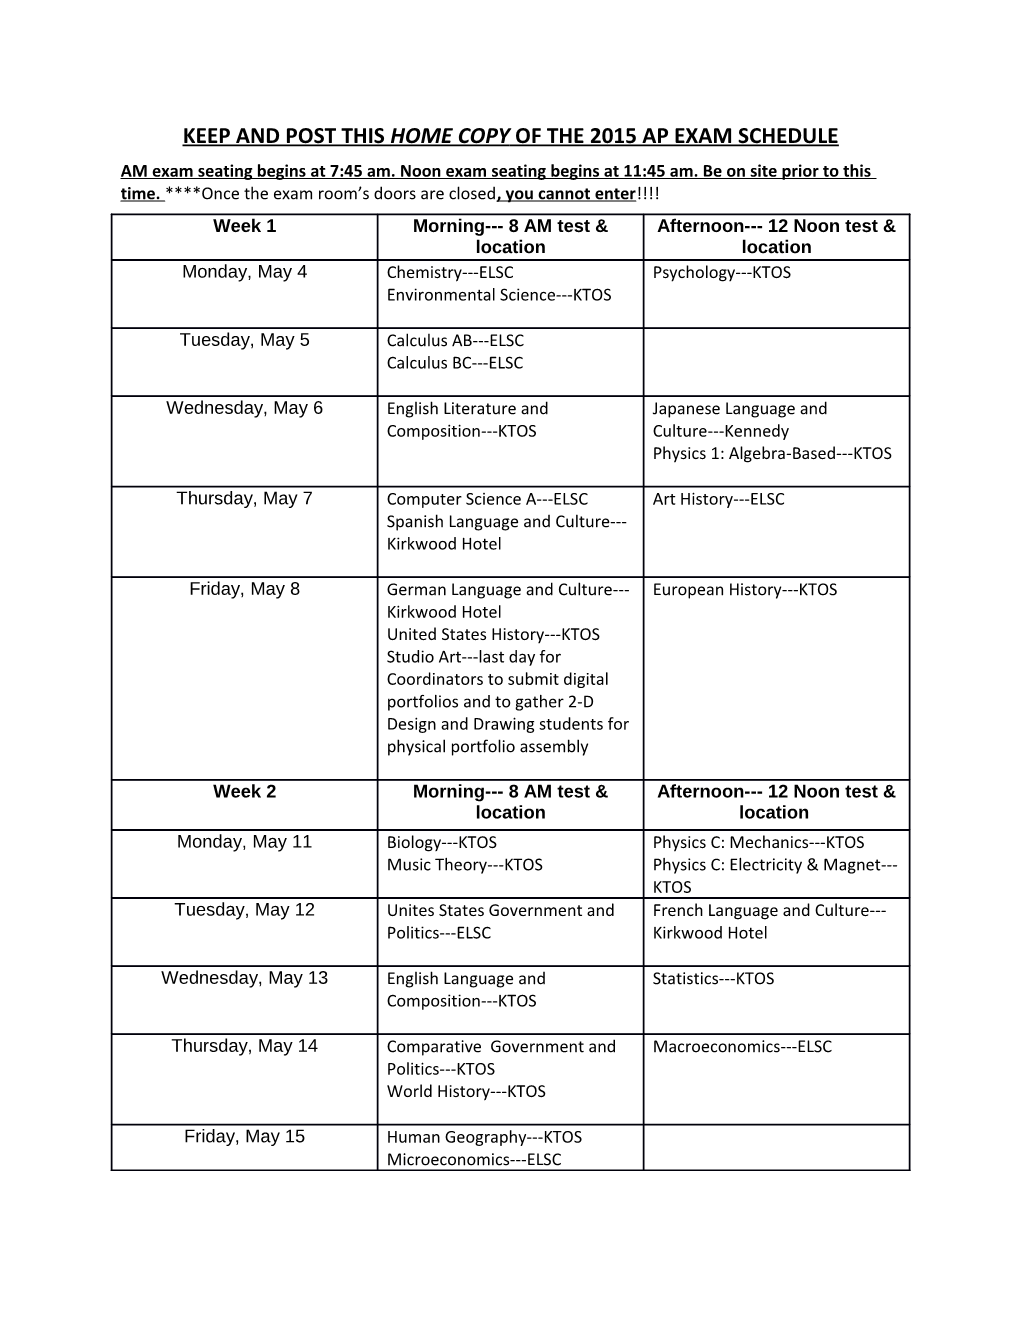 Keep and Post This Home Copy of the 2015 Ap Exam Schedule